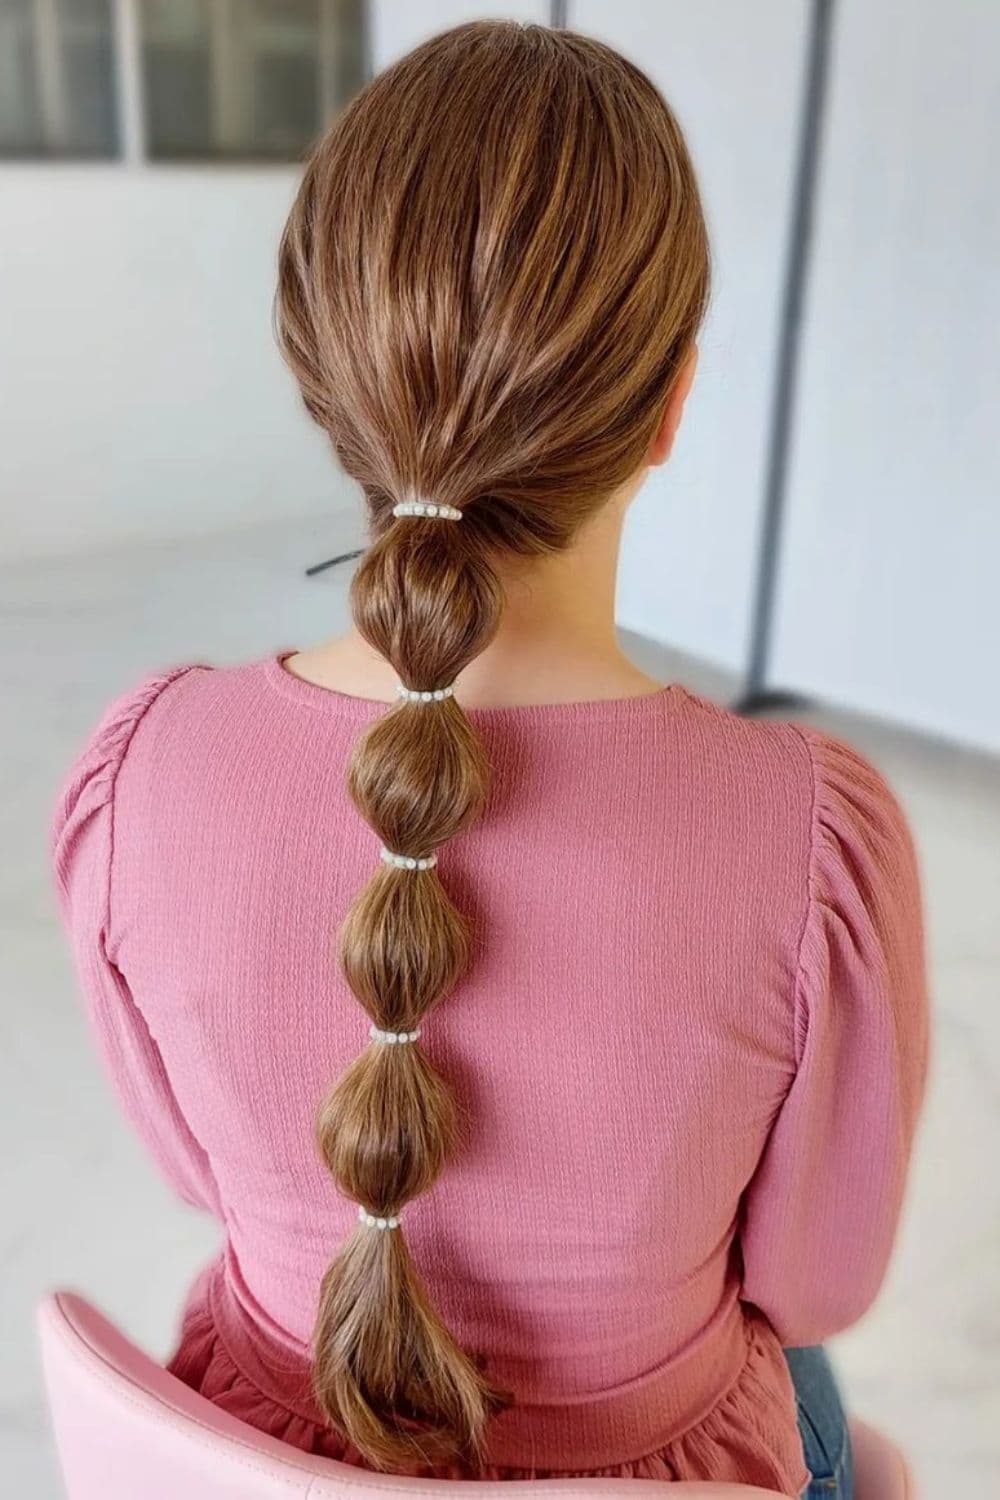 A woman in a pink blouse with a brown low bubble ponytail.